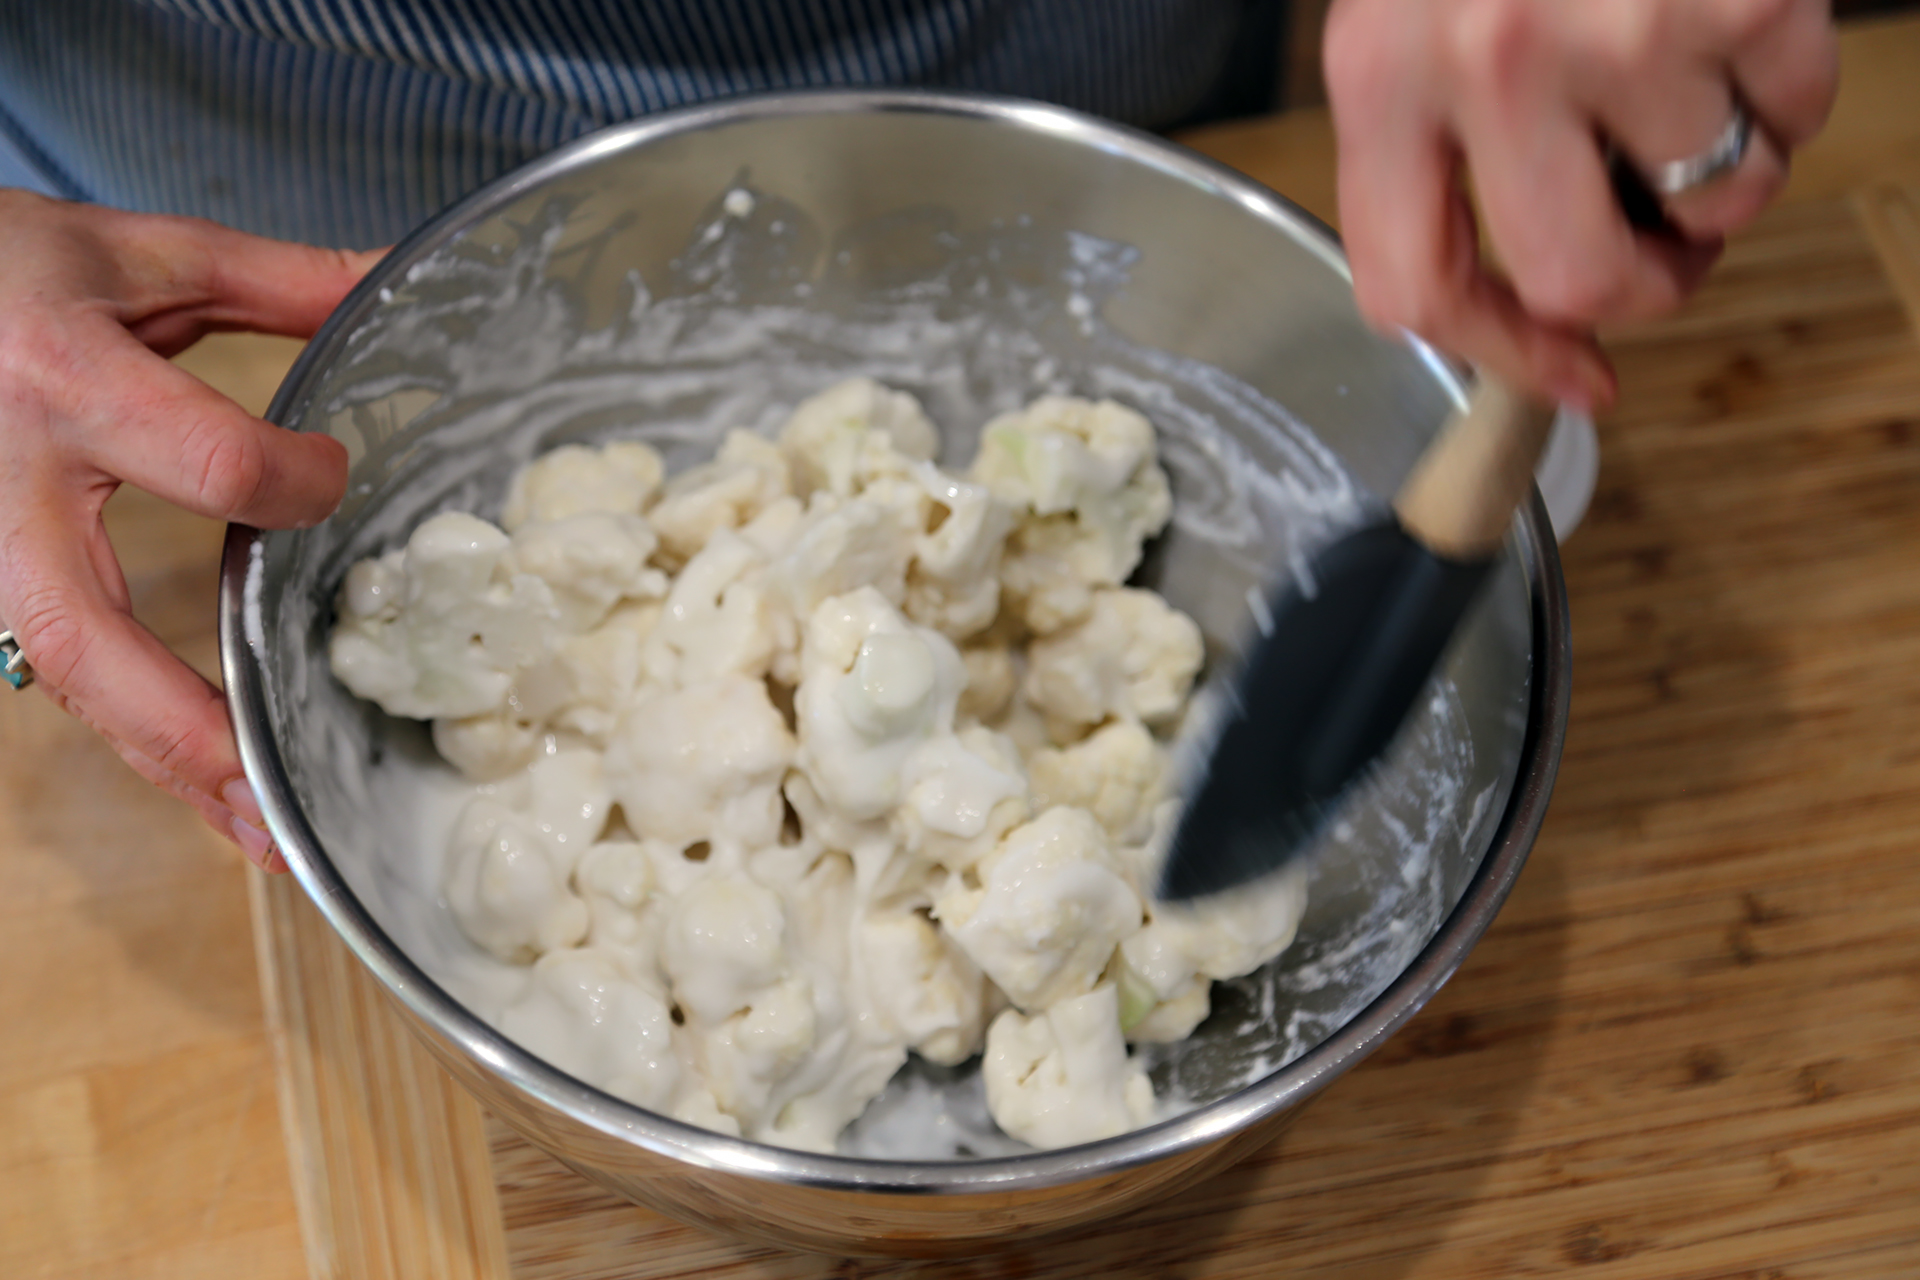 Drop the cauliflower florets into the batter and toss to combine, until each floret is coated with batter.